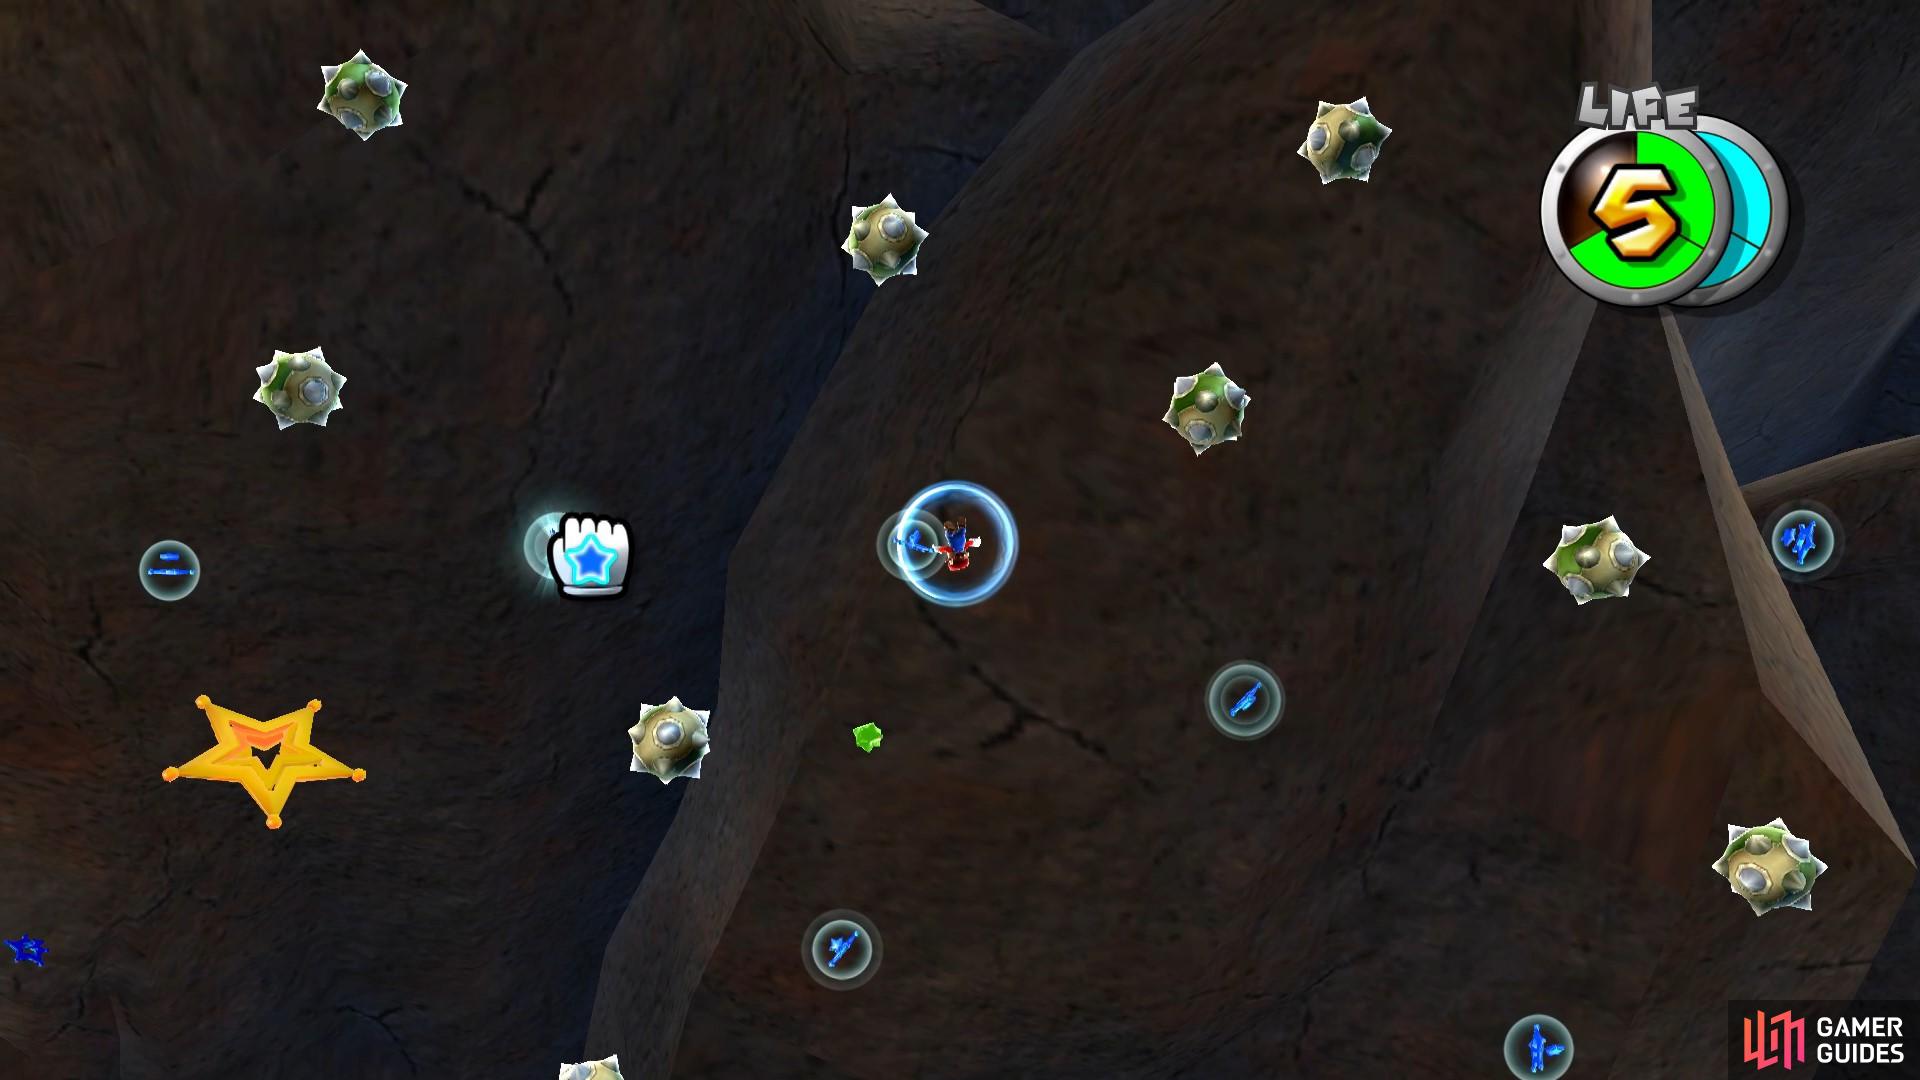 Use the Pull Stars to take you through the minefield to the Launch Star.